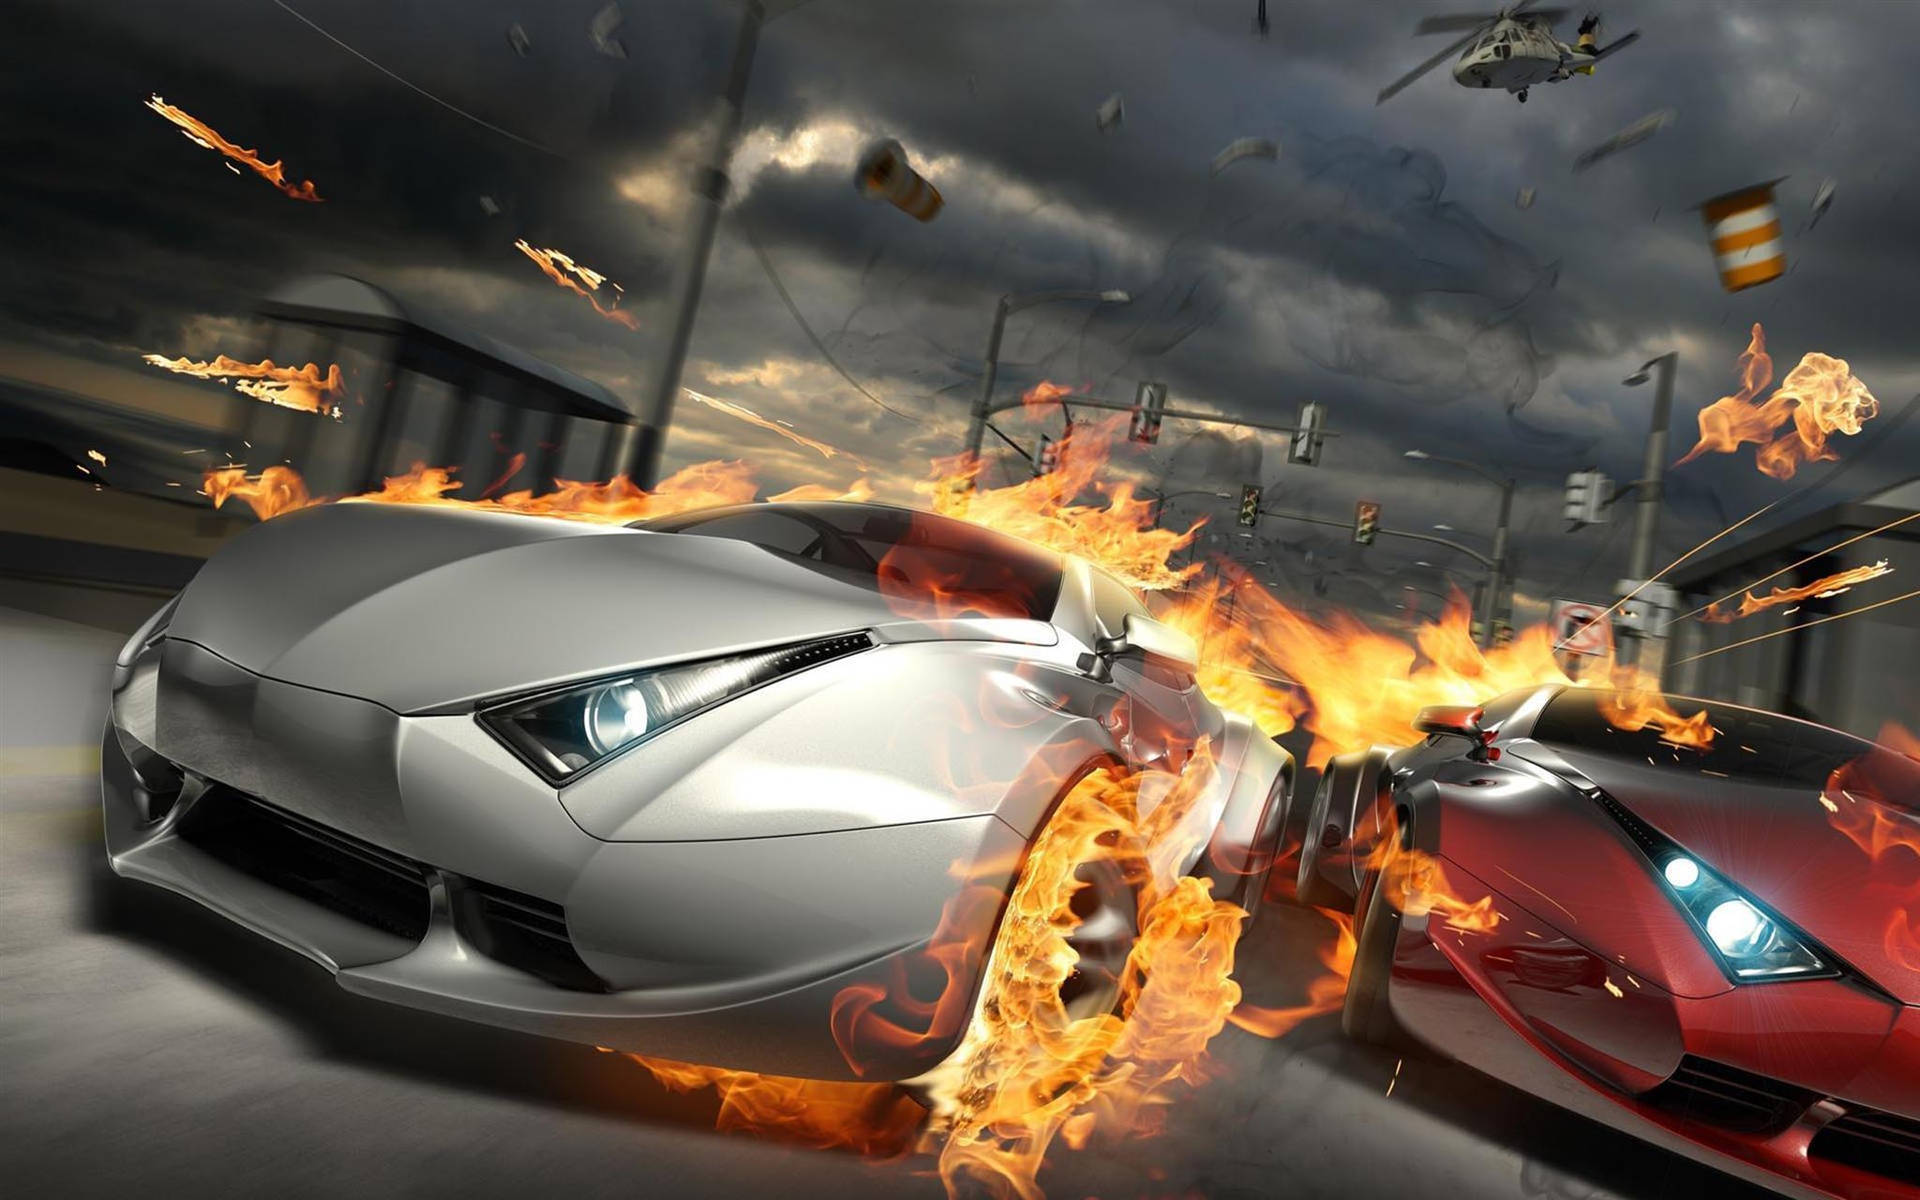 Cool Cars Fiery Race Background